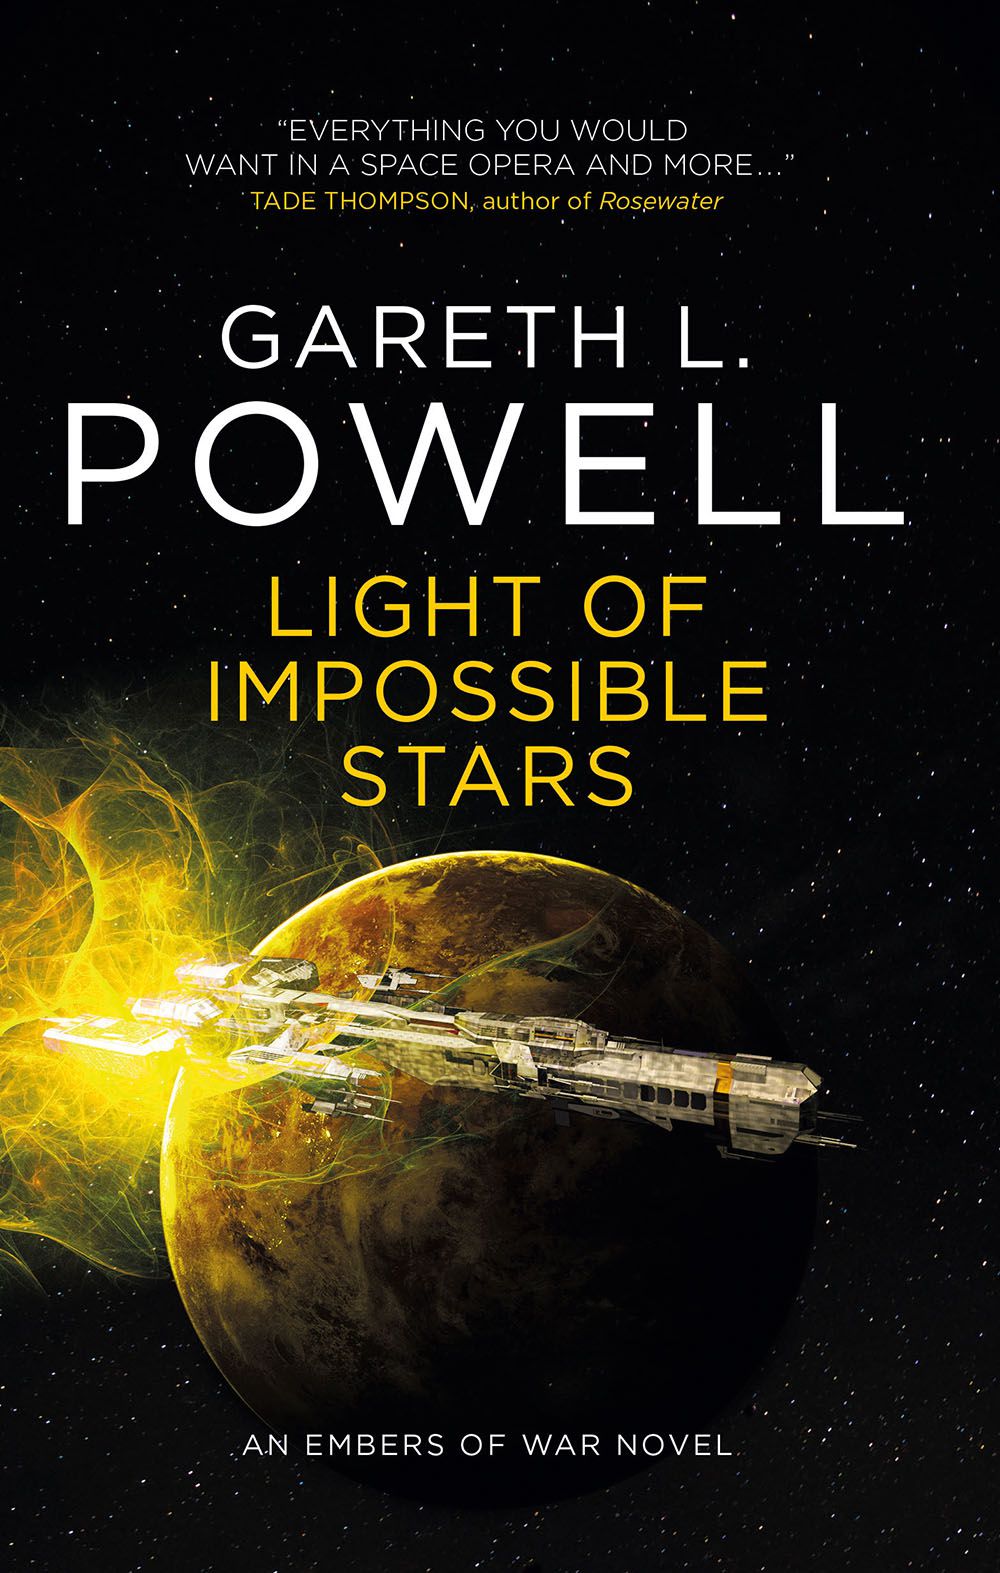 the ship orbits the planet on the cover of Gareth L. Powell's Impact Stars